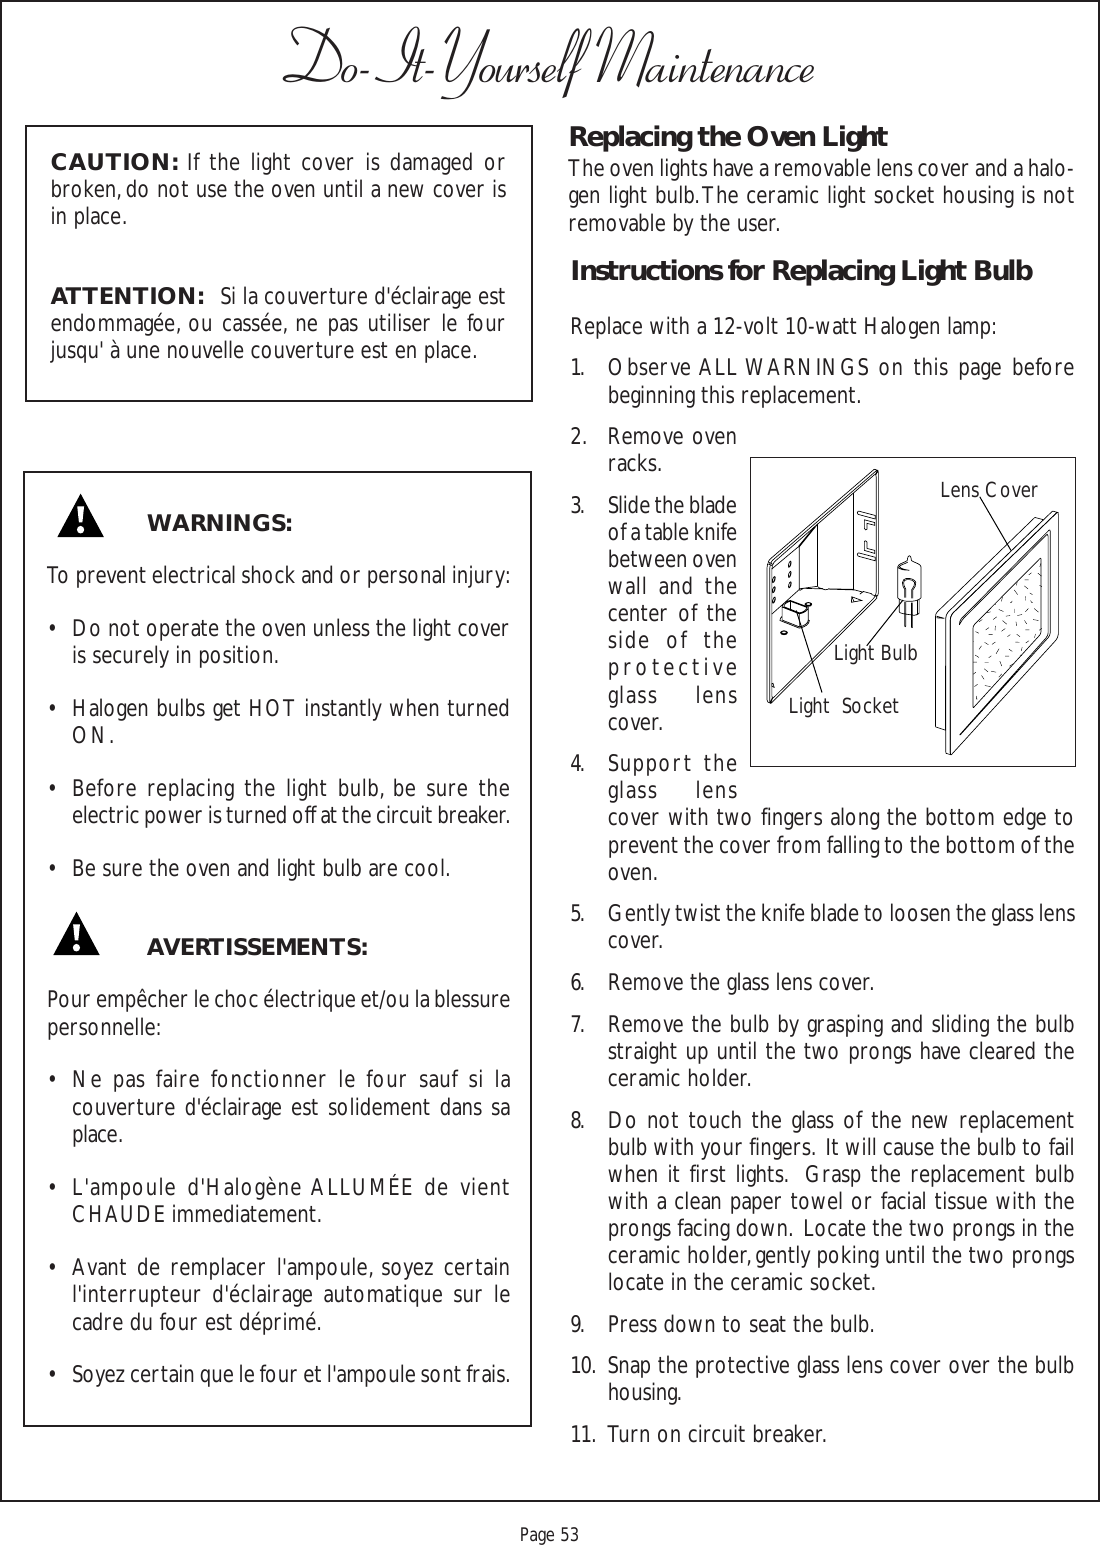 Proof 9-21-99Page 53Do-It-Yourself MaintenanceReplacing the Oven LightThe oven lights have a removable lens cover and a halo-gen light bulb. The ceramic light socket housing is notremovable by the user.Instructions for Replacing Light BulbReplace with a 12-volt 10-watt Halogen lamp:1. Observe ALL WARNINGS on this page beforebeginning this replacement.2. Remove ovenracks.3. Slide the bladeof a table knifebetween ovenwall and thecenter of theside of theprotectiveglass lenscover.4. Support theglass lenscover with two fingers along the bottom edge toprevent the cover from falling to the bottom of theoven.5. Gently twist the knife blade to loosen the glass lenscover.6. Remove the glass lens cover.7. Remove the bulb by grasping and sliding the bulbstraight up until the two prongs have cleared theceramic holder.8. Do not touch the glass of the new replacementbulb with your fingers.  It will cause the bulb to failwhen it first lights.  Grasp the replacement bulbwith a clean paper towel or facial tissue with theprongs facing down.  Locate the two prongs in theceramic holder, gently poking until the two prongslocate in the ceramic socket.9. Press down to seat the bulb.10. Snap the protective glass lens cover over the bulbhousing.11. Turn on circuit breaker.WARNINGS:To prevent electrical shock and or personal injury:• Do not operate the oven unless the light coveris securely in position.• Halogen bulbs get HOT instantly when turnedON.• Before replacing the light bulb, be sure theelectric power is turned off at the circuit breaker.• Be sure the oven and light bulb are cool.AVERTISSEMENTS:Pour empêcher le choc électrique et/ou la blessurepersonnelle:• Ne pas faire fonctionner le four sauf si lacouverture d&apos;éclairage est solidement dans saplace.• L&apos;ampoule d&apos;Halogène ALLUMÉE de vientCHAUDE immediatement.• Avant de remplacer l&apos;ampoule, soyez certainl&apos;interrupteur d&apos;éclairage automatique sur lecadre du four est déprimé.• Soyez certain que le four et l&apos;ampoule sont frais.CAUTION: If the light cover is damaged orbroken, do not use the oven until a new cover isin place.ATTENTION:   Si la couverture d&apos;éclairage estendommagée, ou cassée, ne pas utiliser le fourjusqu&apos; à une nouvelle couverture est en place.Light BulbLens CoverLight  Socket